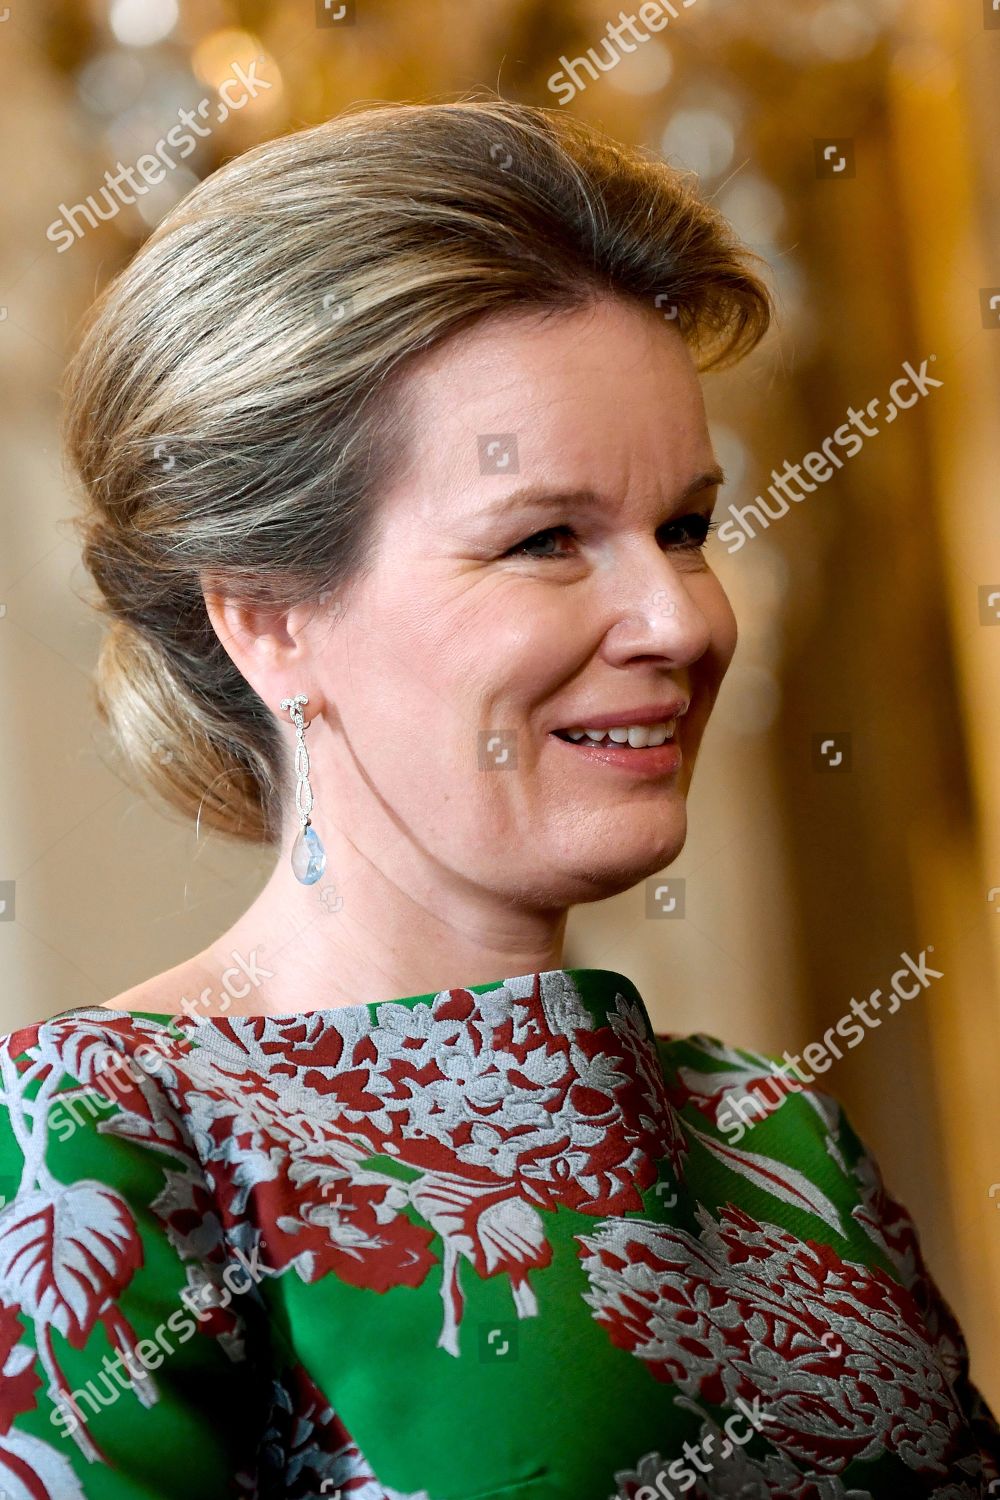 king-philippe-and-queen-mathilde-receive-the-heads-of-diplomatic-missions-brussels-belgium-shutterstock-editorial-10525487p.jpg